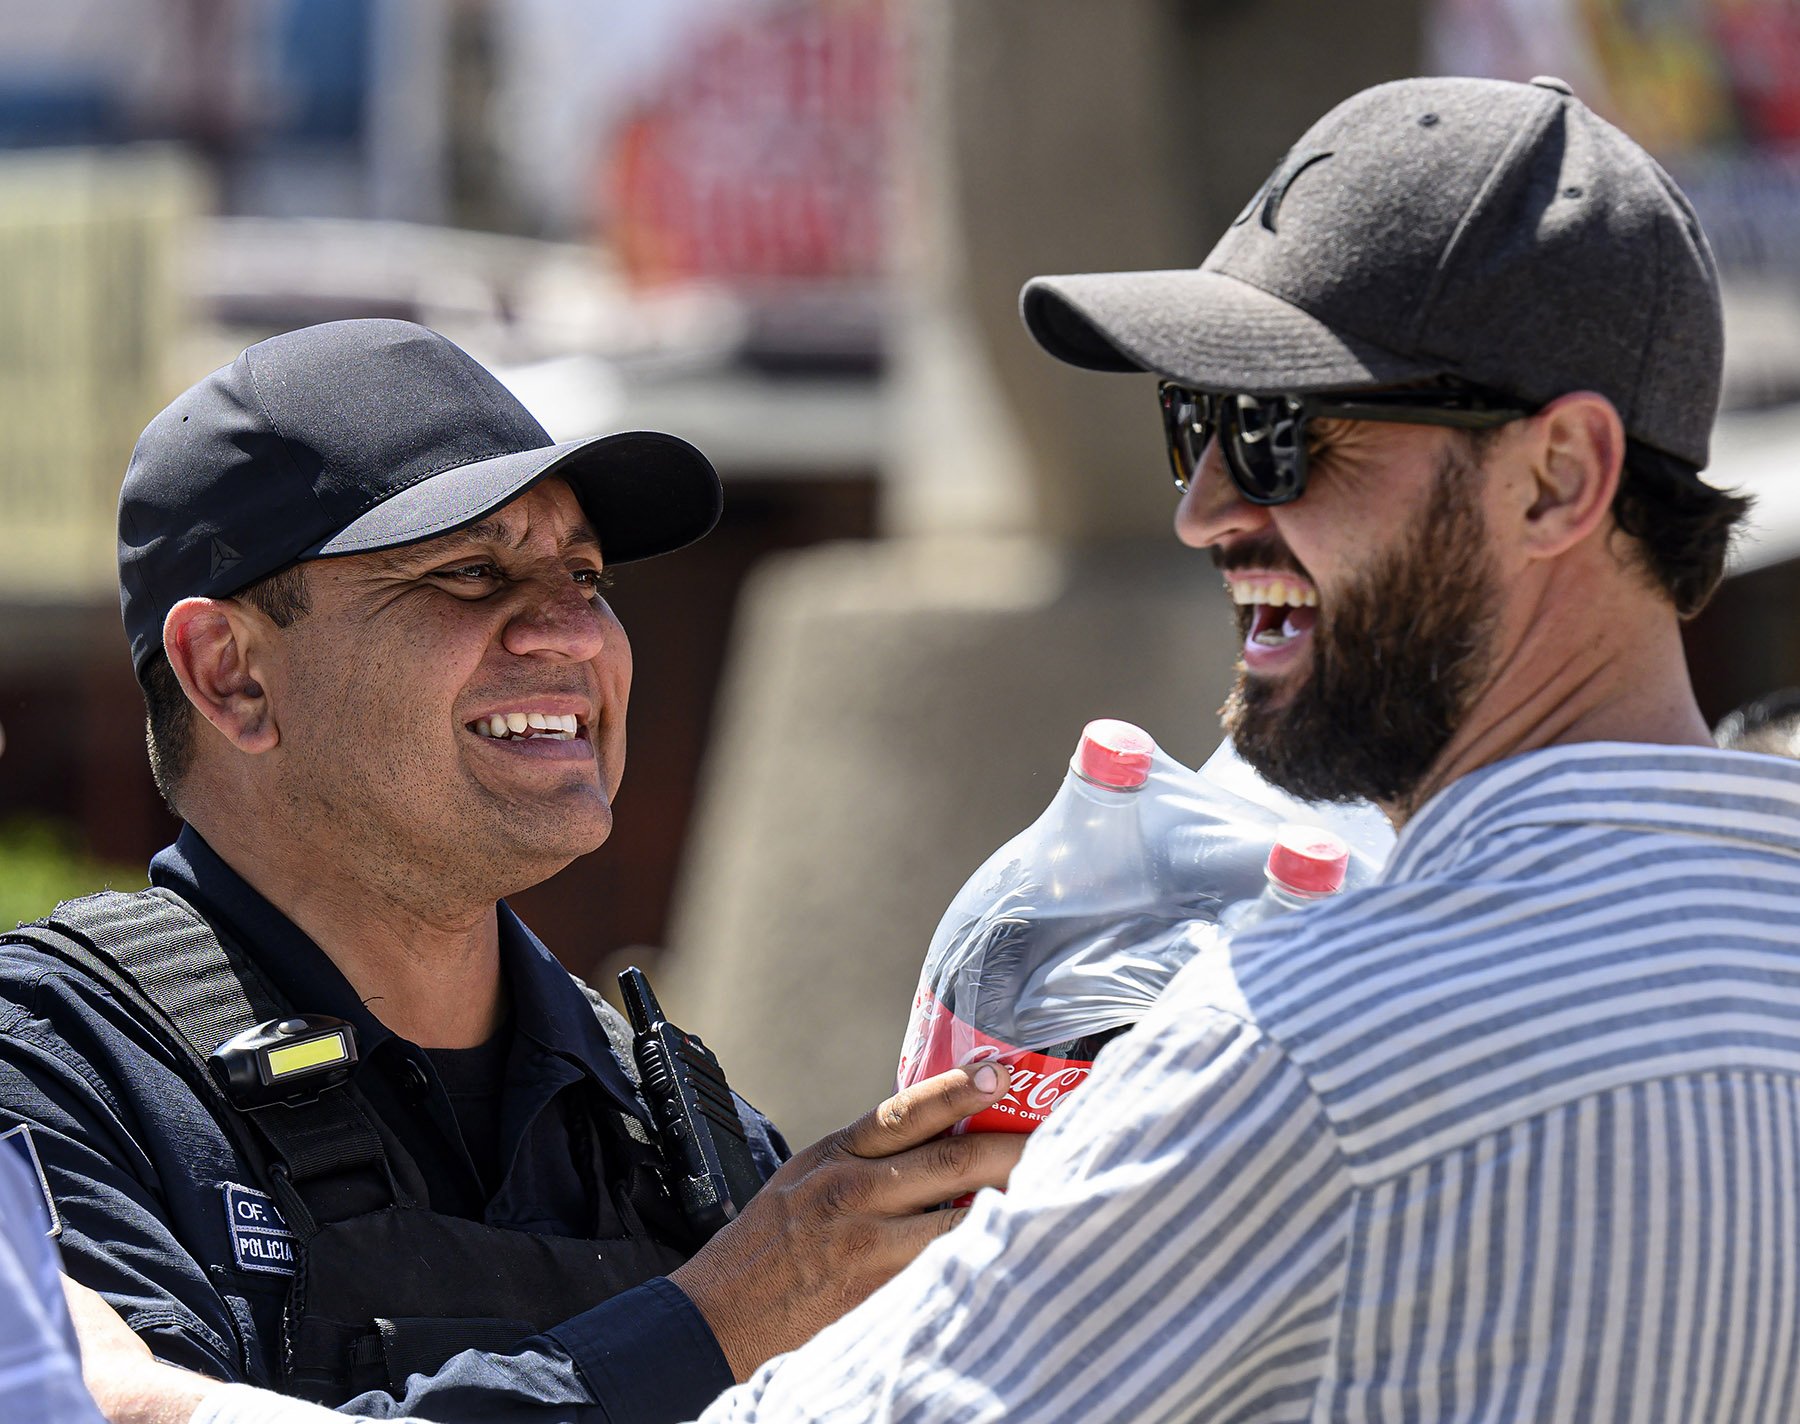  Ukrainian refugee Villi Mikhailov jokes with a Tijuana police officer while he and his twin brother Yan, help keep the asylum-seeking process running smoothly on Wednesday, March 30, 2022. Ukrainians helped with a waitlist for processing their fello